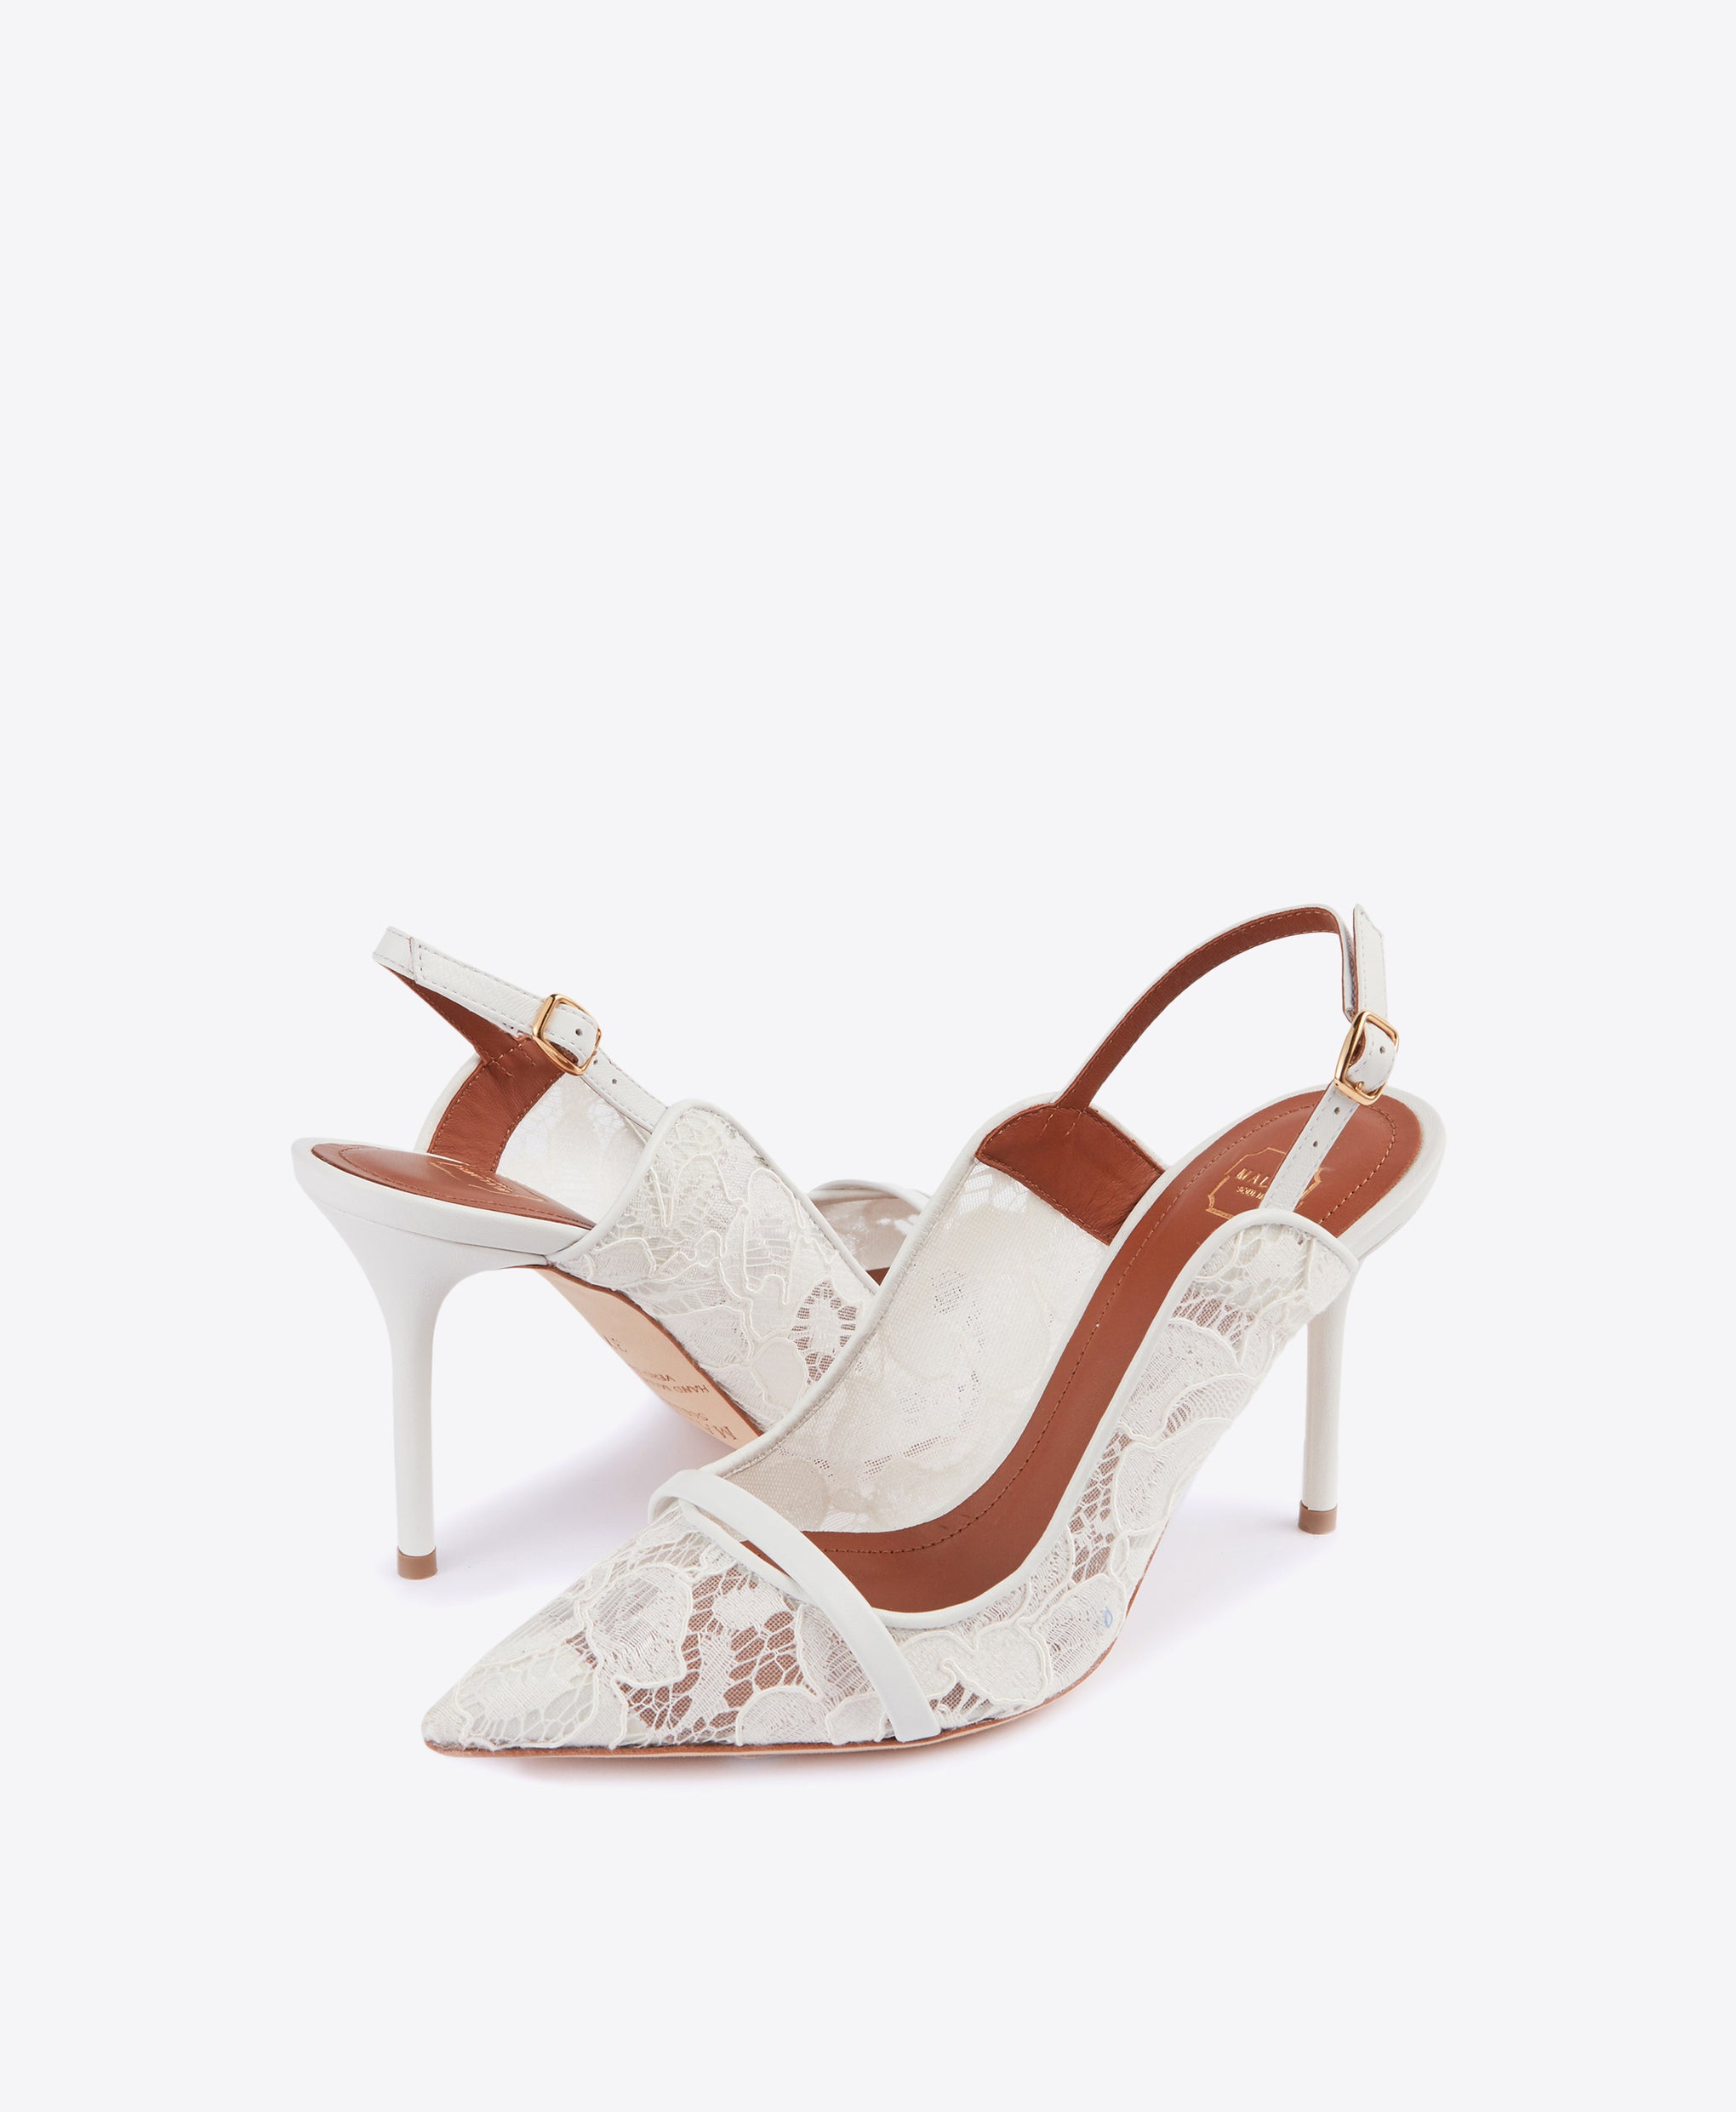 Malone Souliers White Lace and Leather Marion Slingback Pumps with Pointed Toe